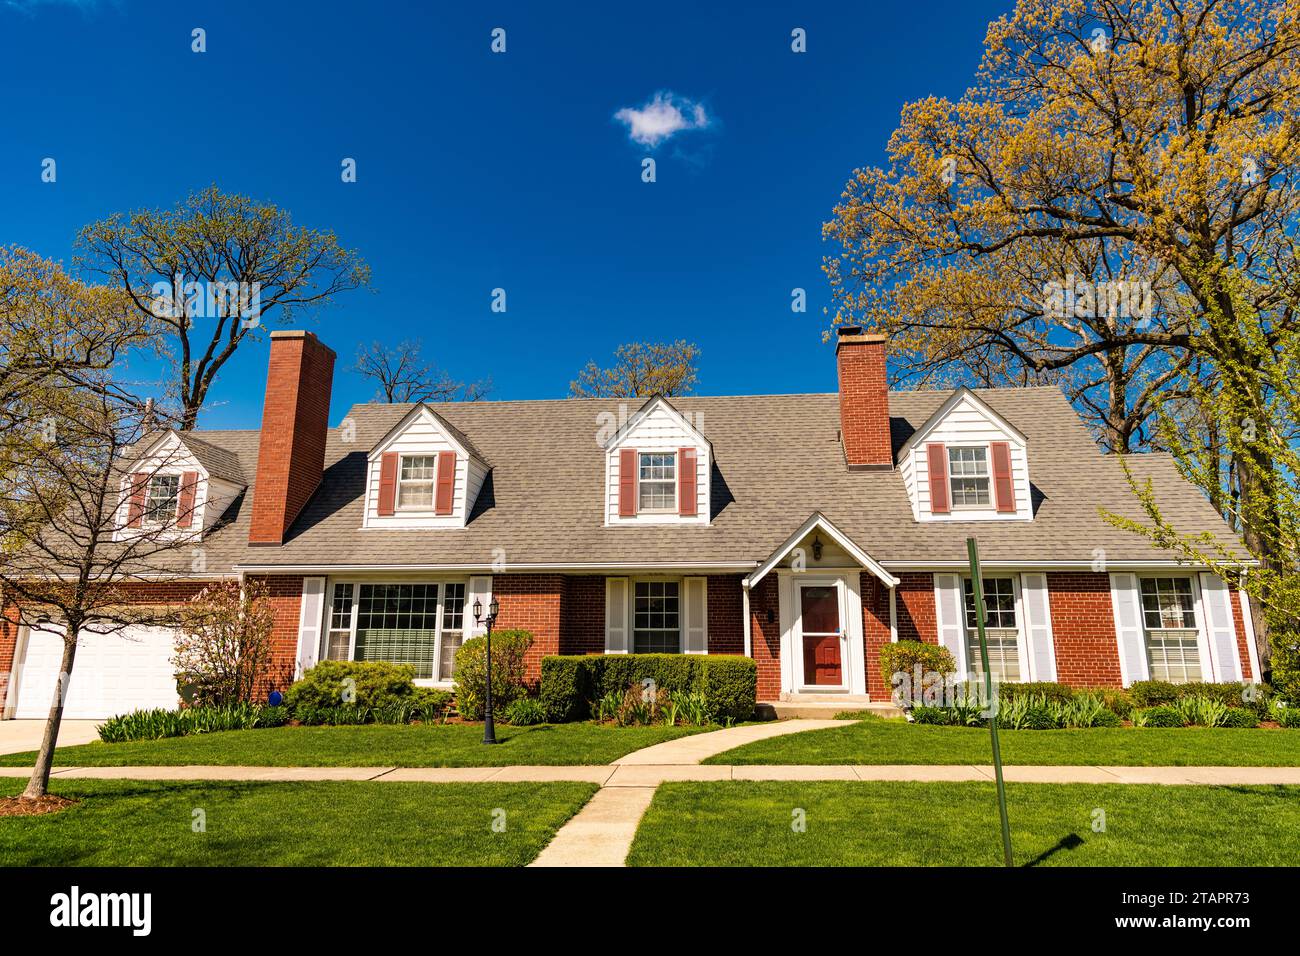 property in neighborhood. real estate and property insurance. property and architecture. housing. suburban house architecture. modern cottage house. a Stock Photo